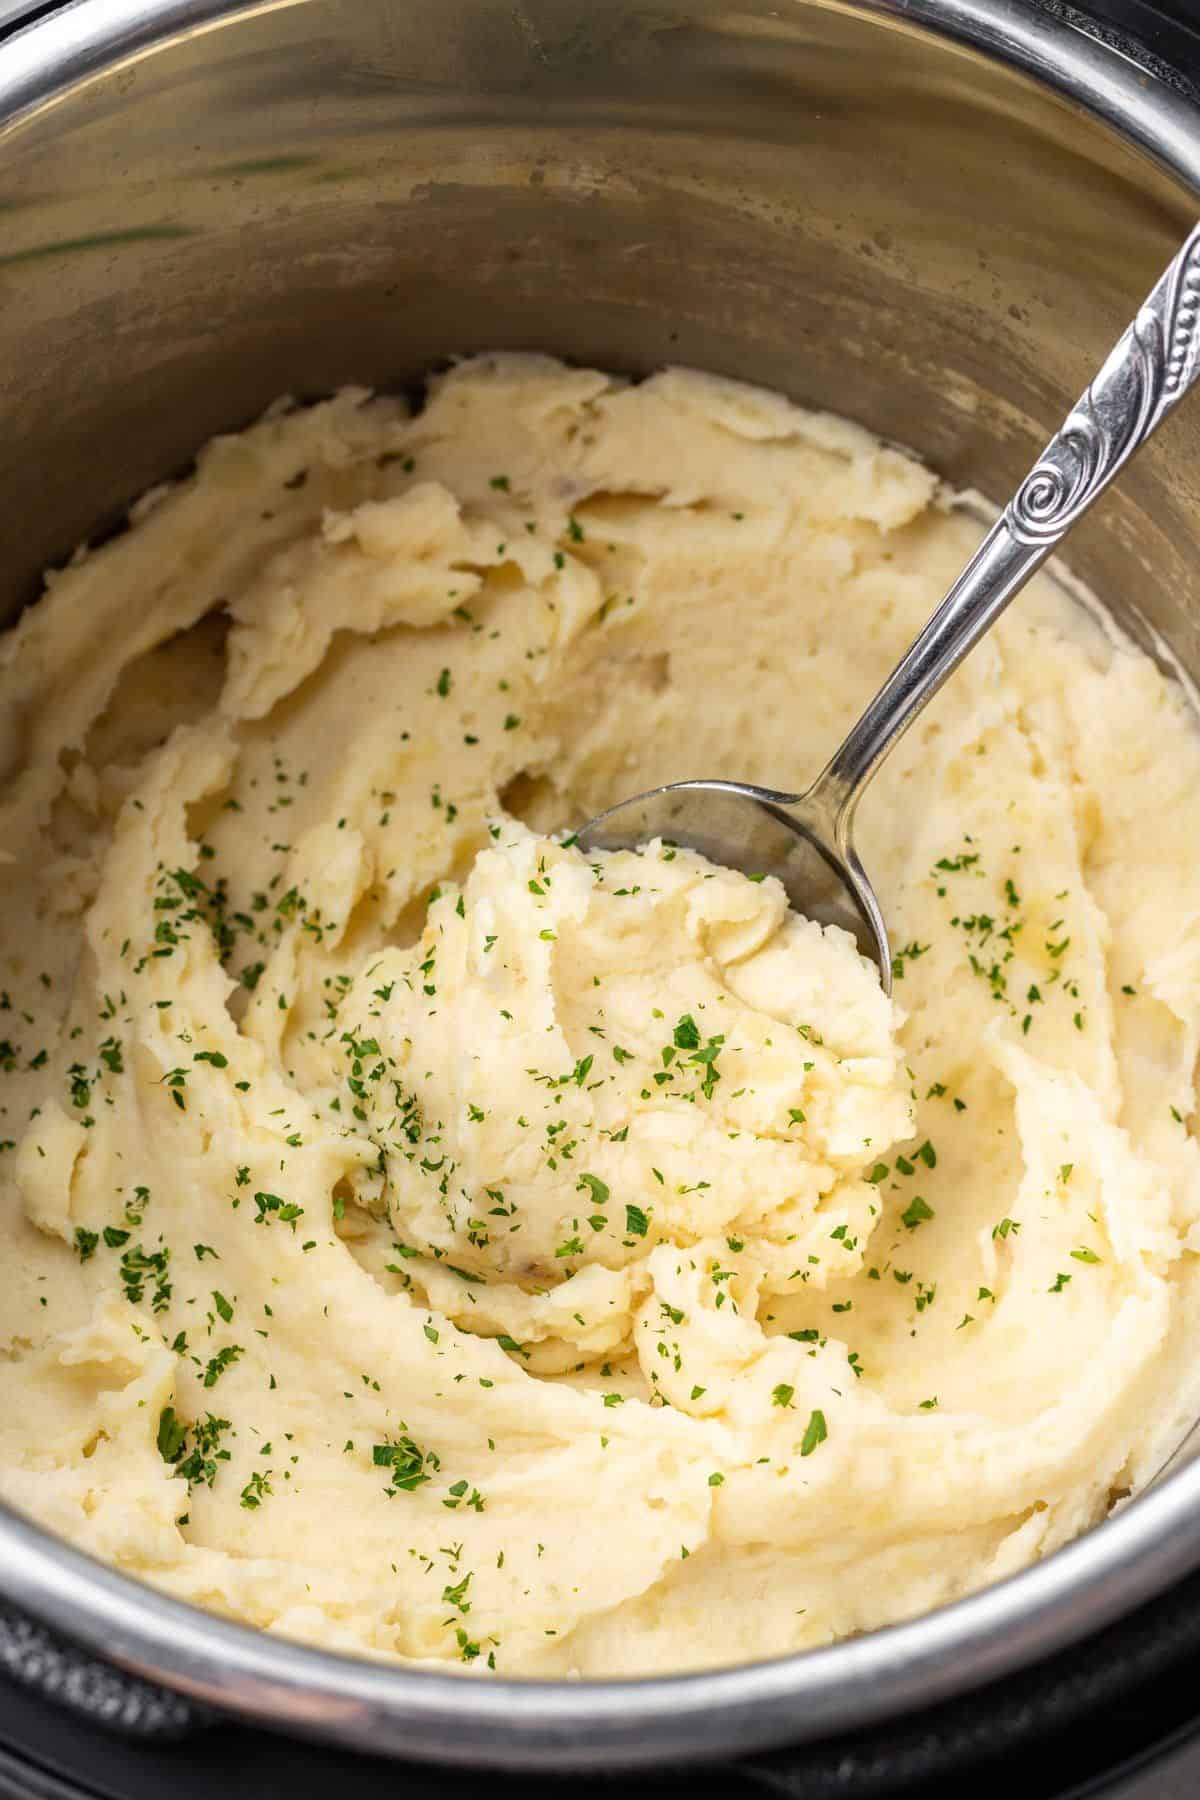 Mashed potatoes in the Instant Pot with a serving spoon.